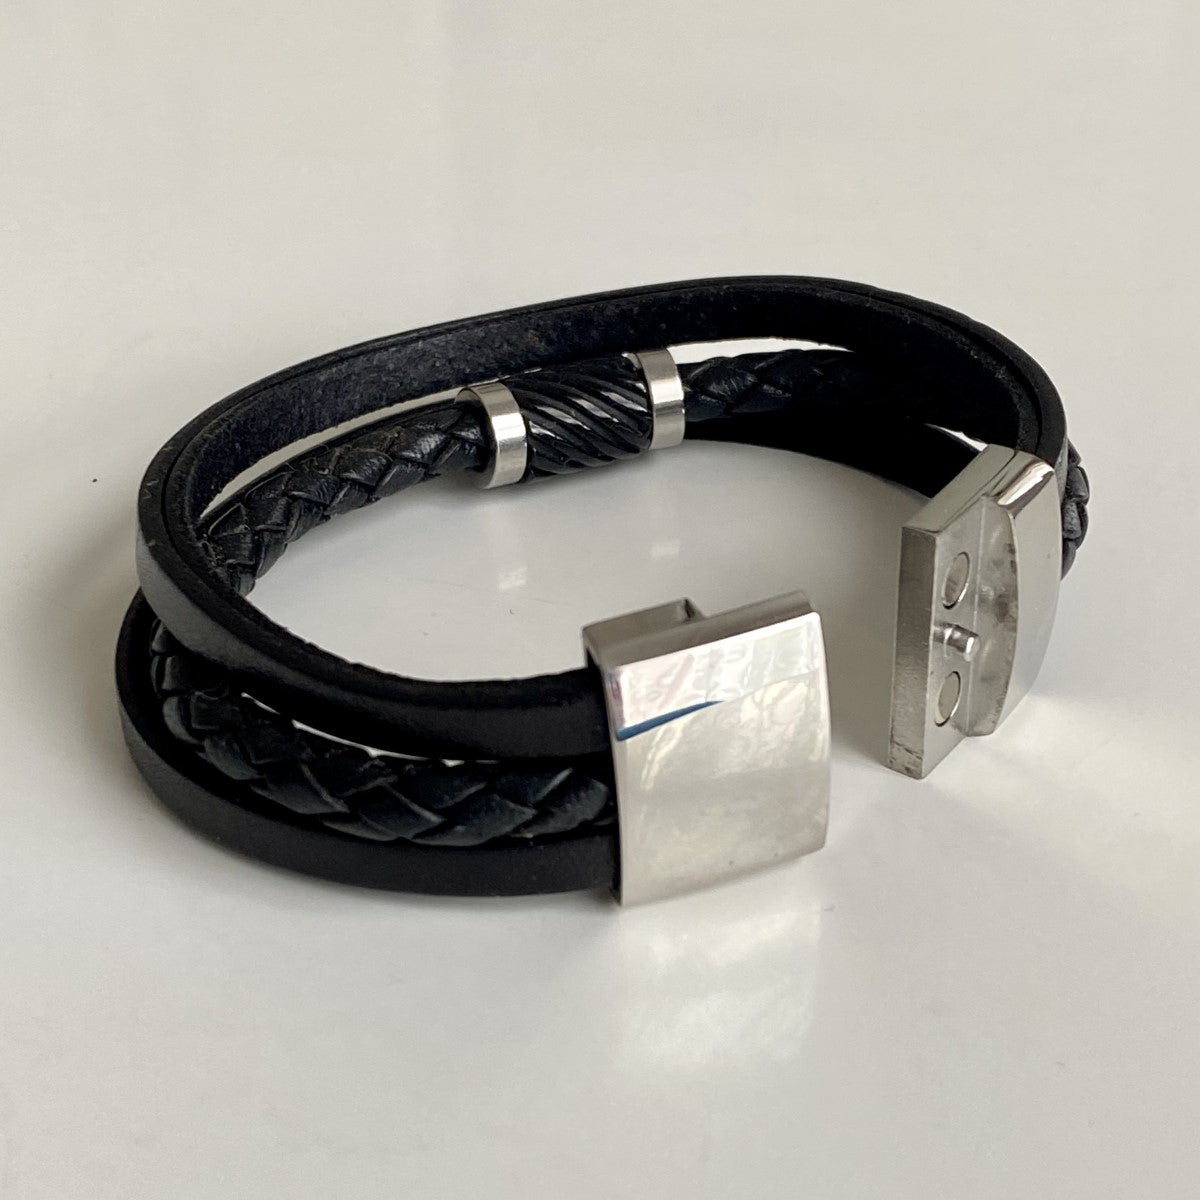 Black Nappa Leather Men's 5 Band Bracelet with Spacers and a Magnetic Stainless Steel Clasp